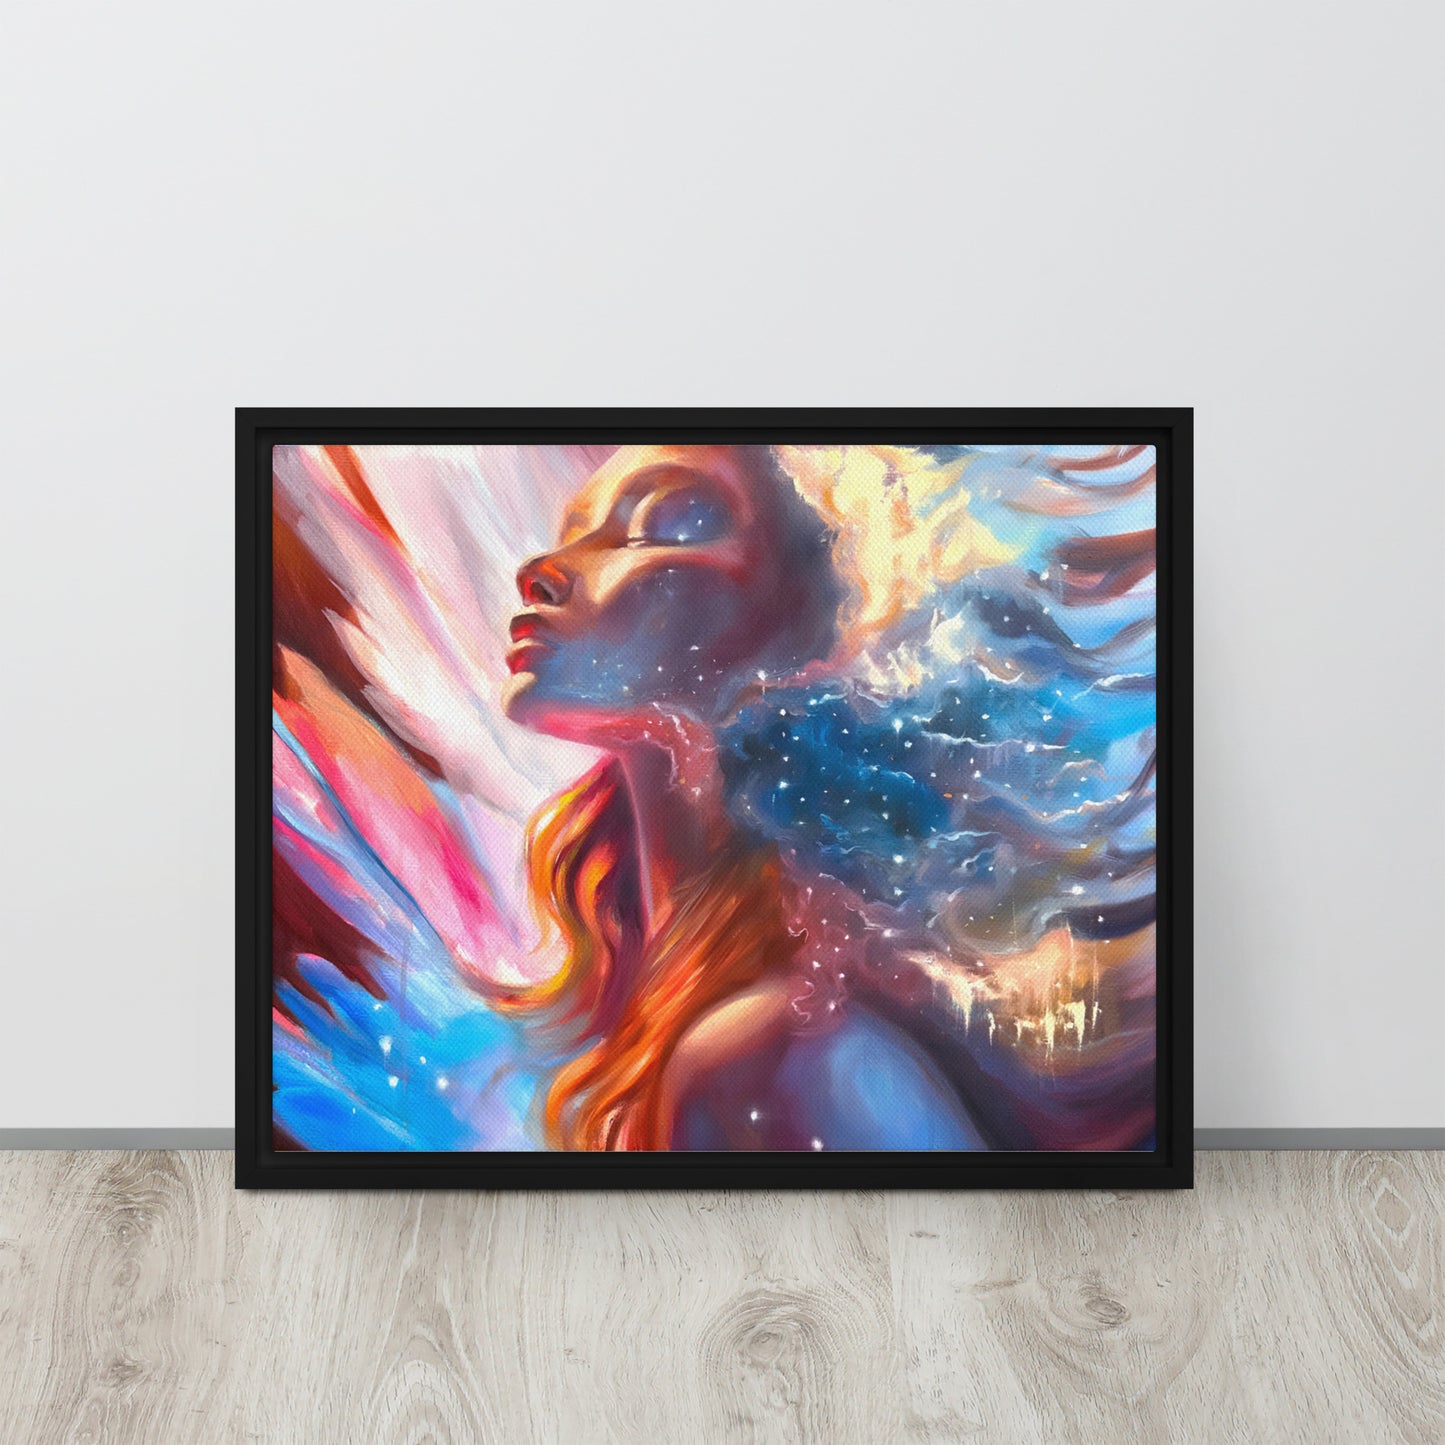 Ecstasy of Oneness - Framed Canvas